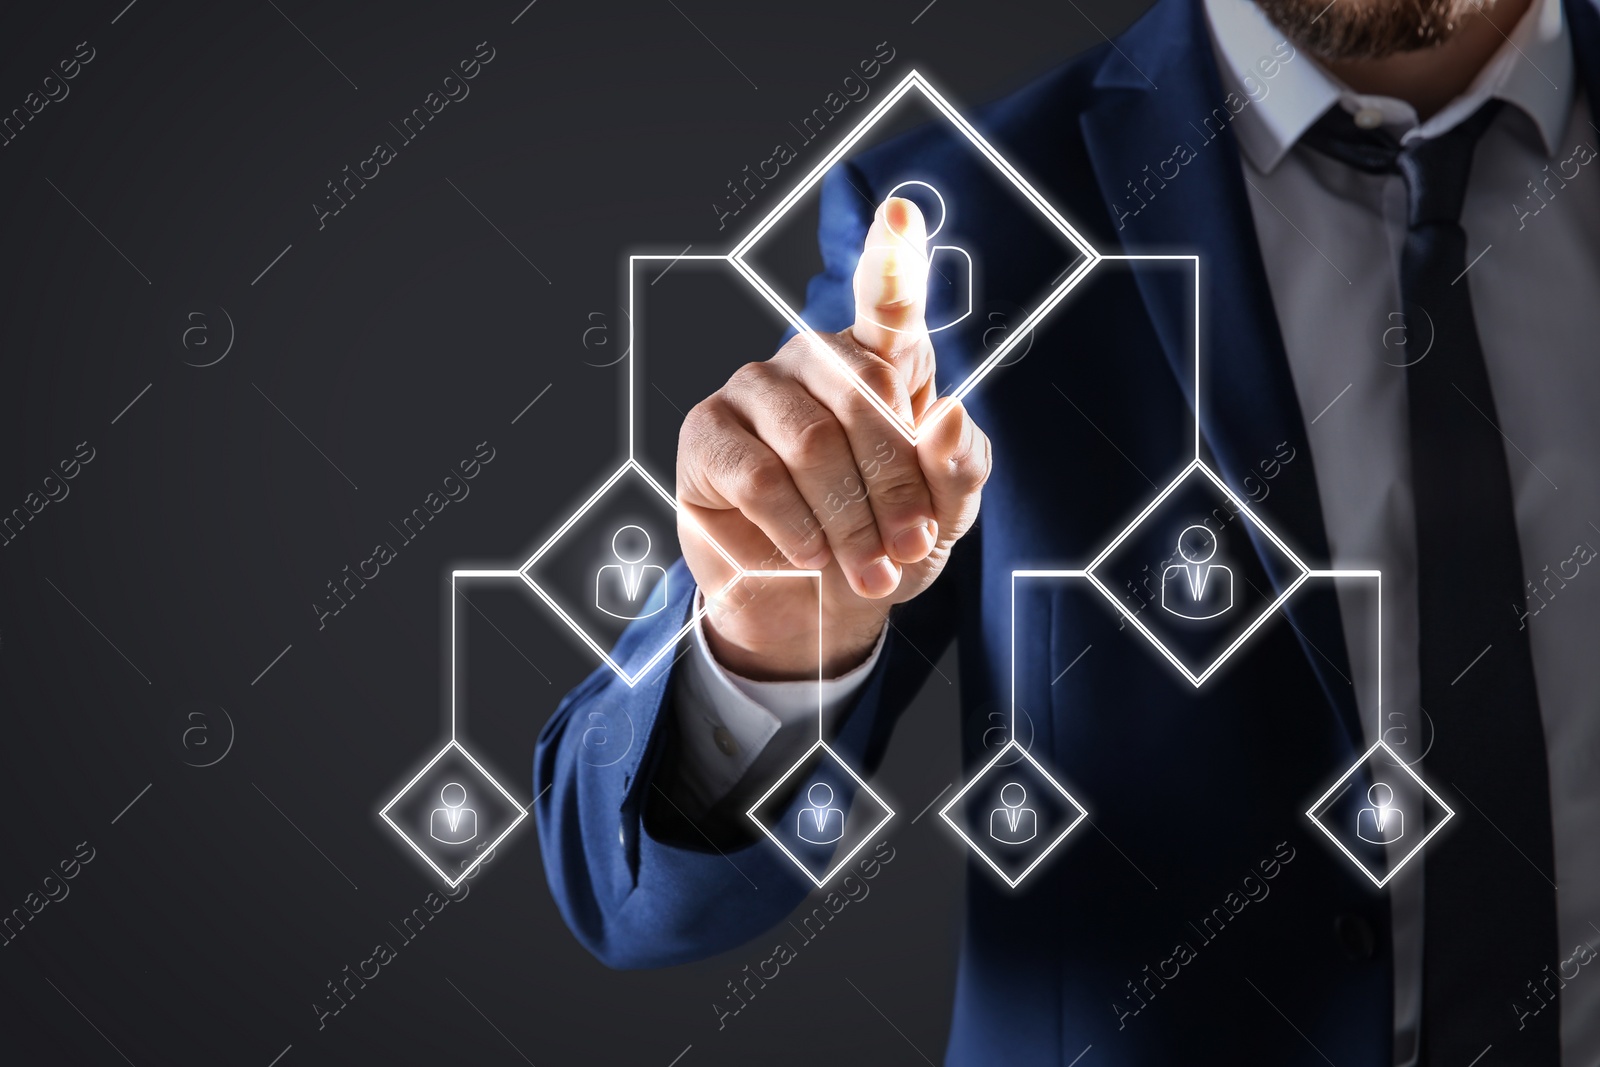 Image of Man touching icon on virtual screen with structure of organization, closeup. Business corporation